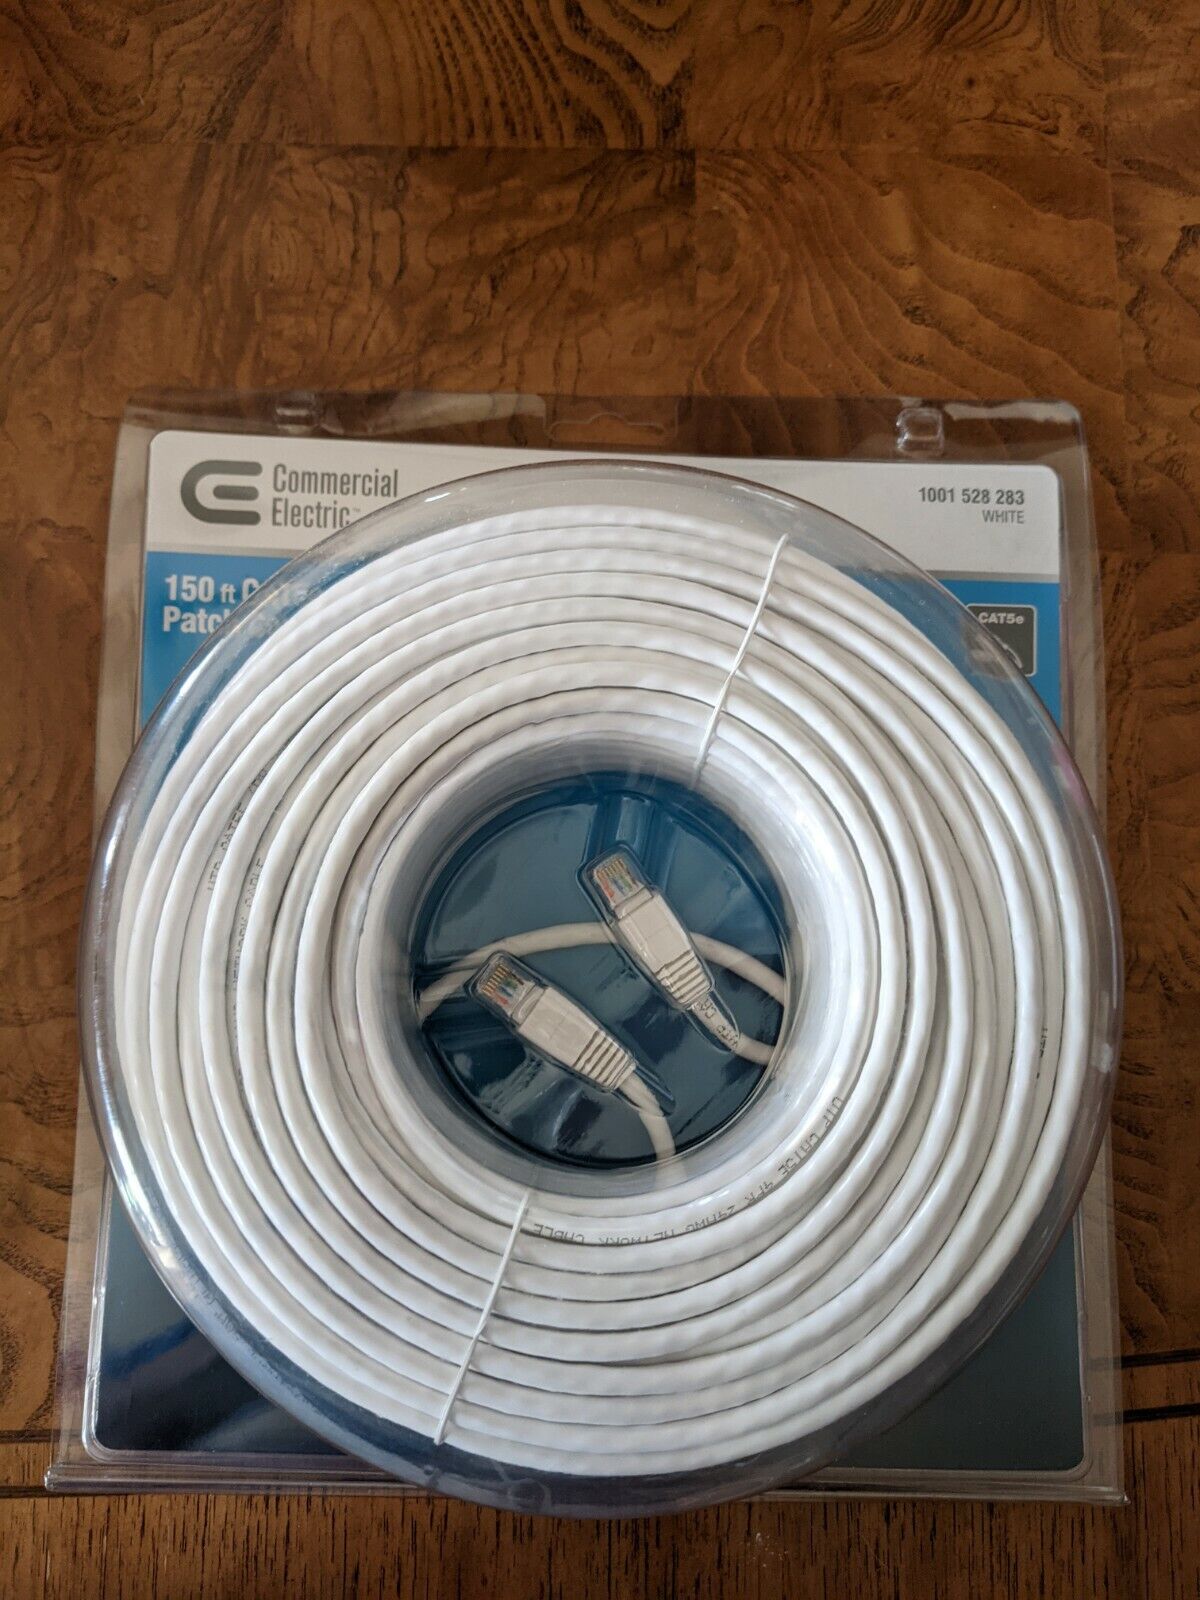 NEW Commercial Electric 150ft CAT5e Patch Cord 1001528283 White